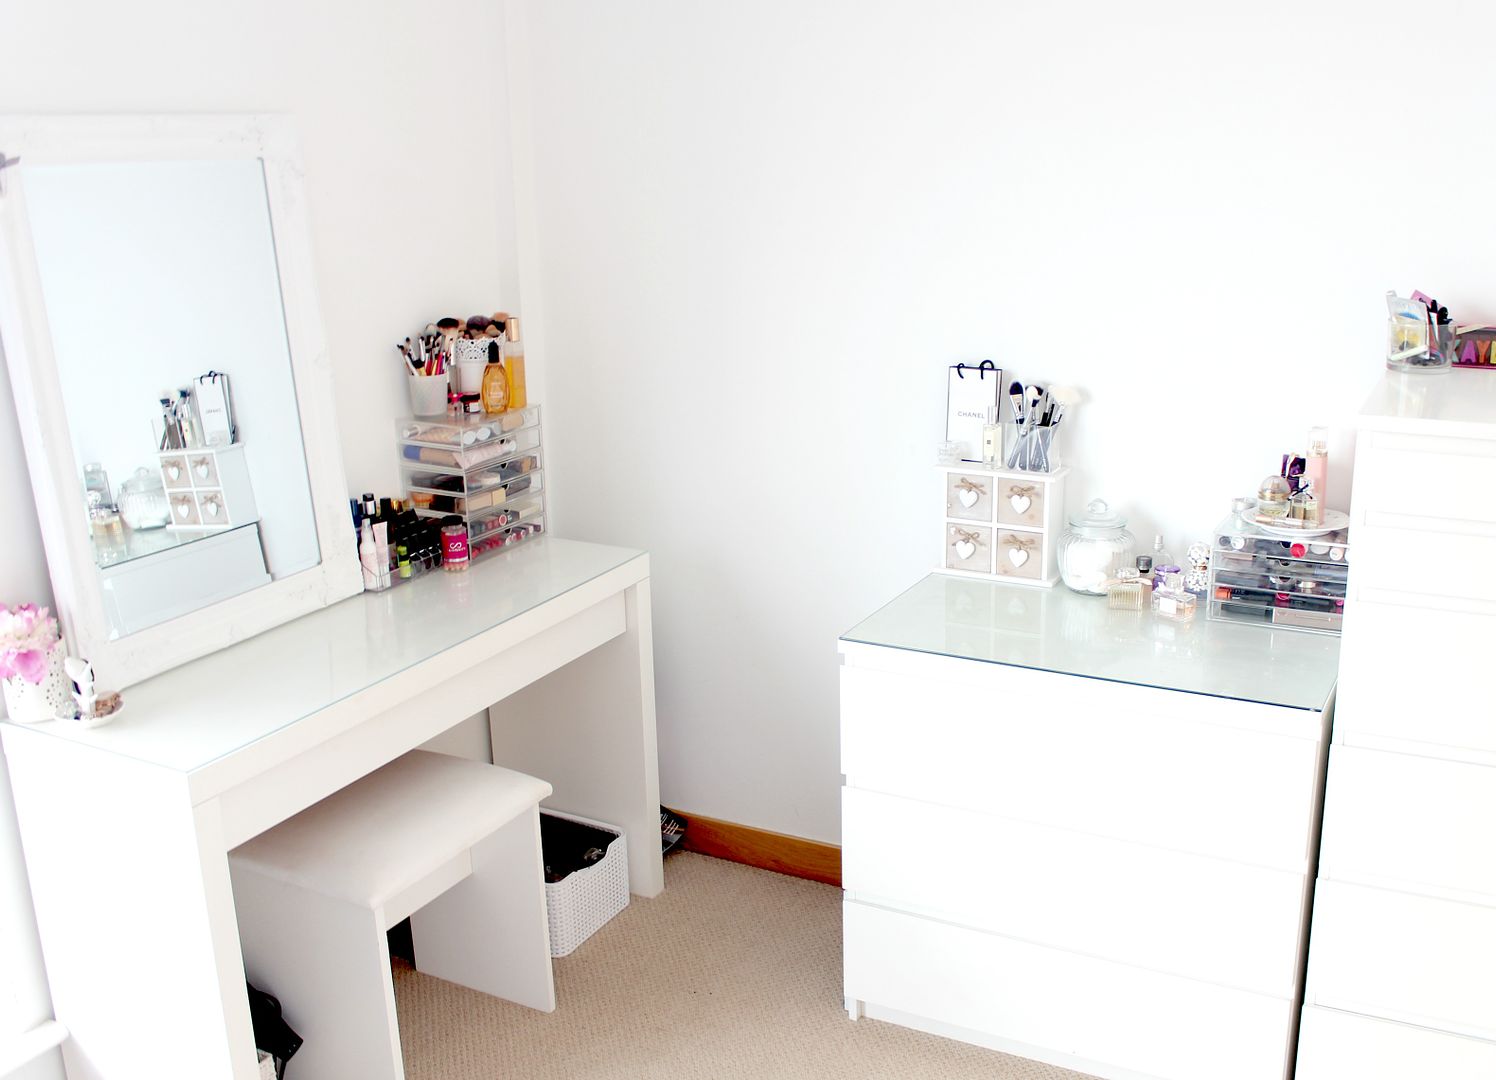 My Dressing Table and Makeup Storage, IKEA Malm Dressing Table, Muji Acrylic Drawers, Makeup and Beauty Storage Ideas, Makeup Storage Inspiration